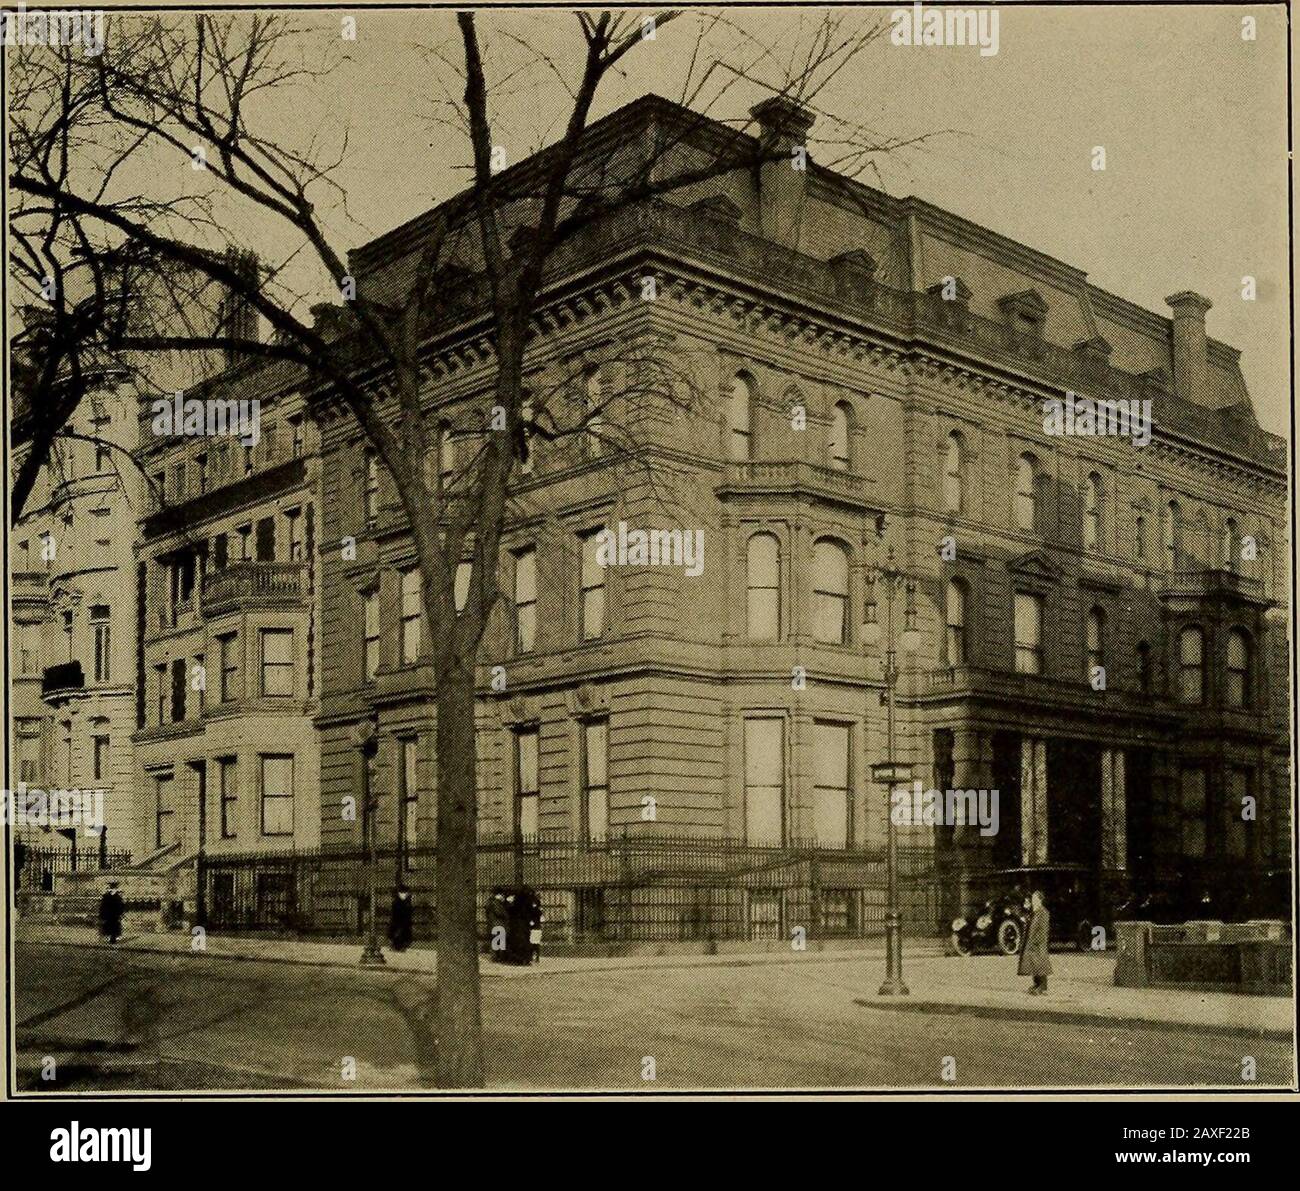 Palatial homes in the city of New York and dwellers there in ..arranged for the convenience of the passer-by . RESIDENCE OF MR. AND MRS. GEORGE J. GOULDNo. 857 FiiTH AvExuK AND No. East Corner 67th Stkeet 1(&gt;. RESIDENCE OF MR. H. P. WHITNEY871 Fifth Avenue and No. East Corner 6Svh Street East 68th Street. No. 5 Mrs. John J. Emery. 8 Mr. and Mrs. Otto H. Kahn.18 Mr. Henry T. Sloane. Fifth Avenue. Northeast Corner 69th Street, No. 1. Mrs. E. H. Harriman.Southeast Corner 69th Street, No. 2.Mr. and Mrs. Ogden Mills.East 69th Street. 3 Mr. and Mrs. Stephen H. P. Pell. 4 Mrs. Maturin Livingston. Stock Photo